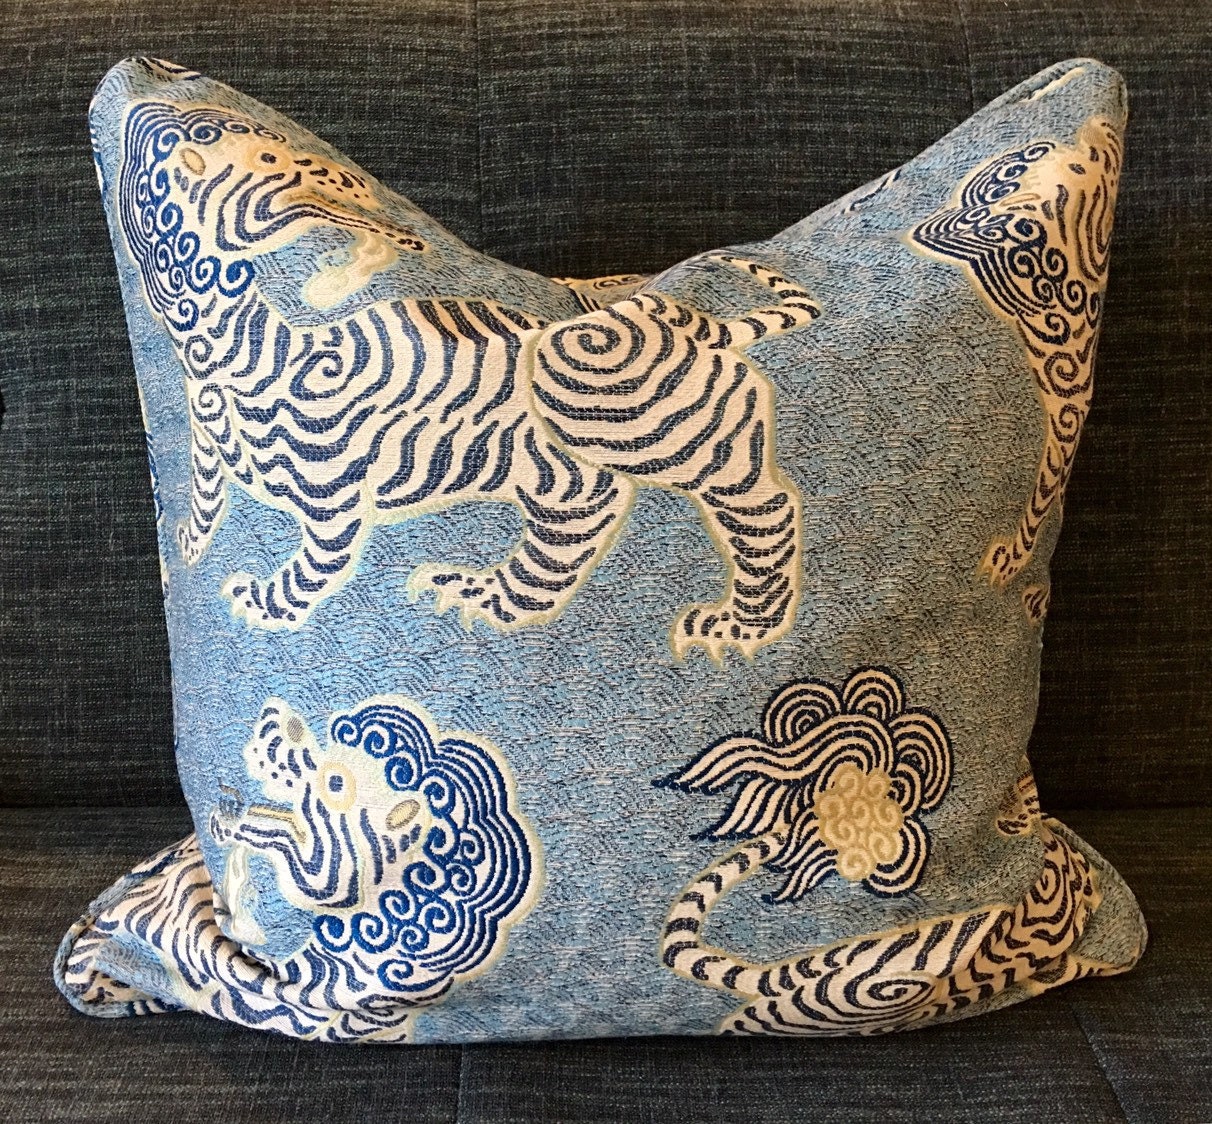  CC Themed Throw Pillow Cover : Handmade Products